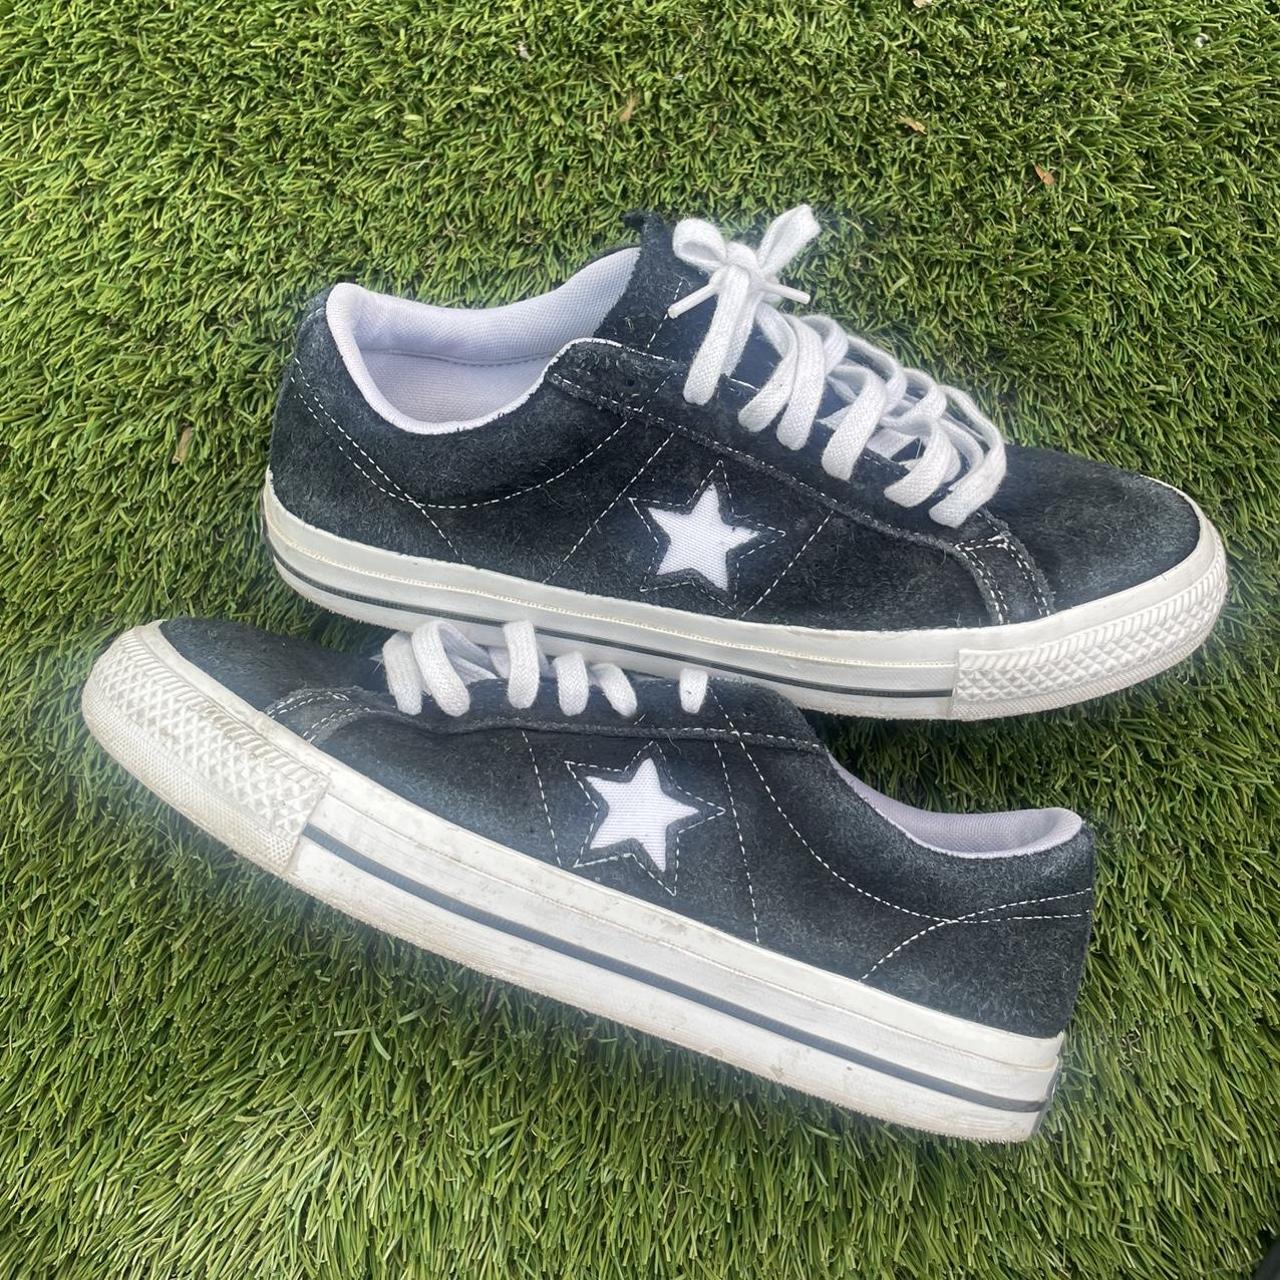 Product Image 1 - size 9 converse one star
could